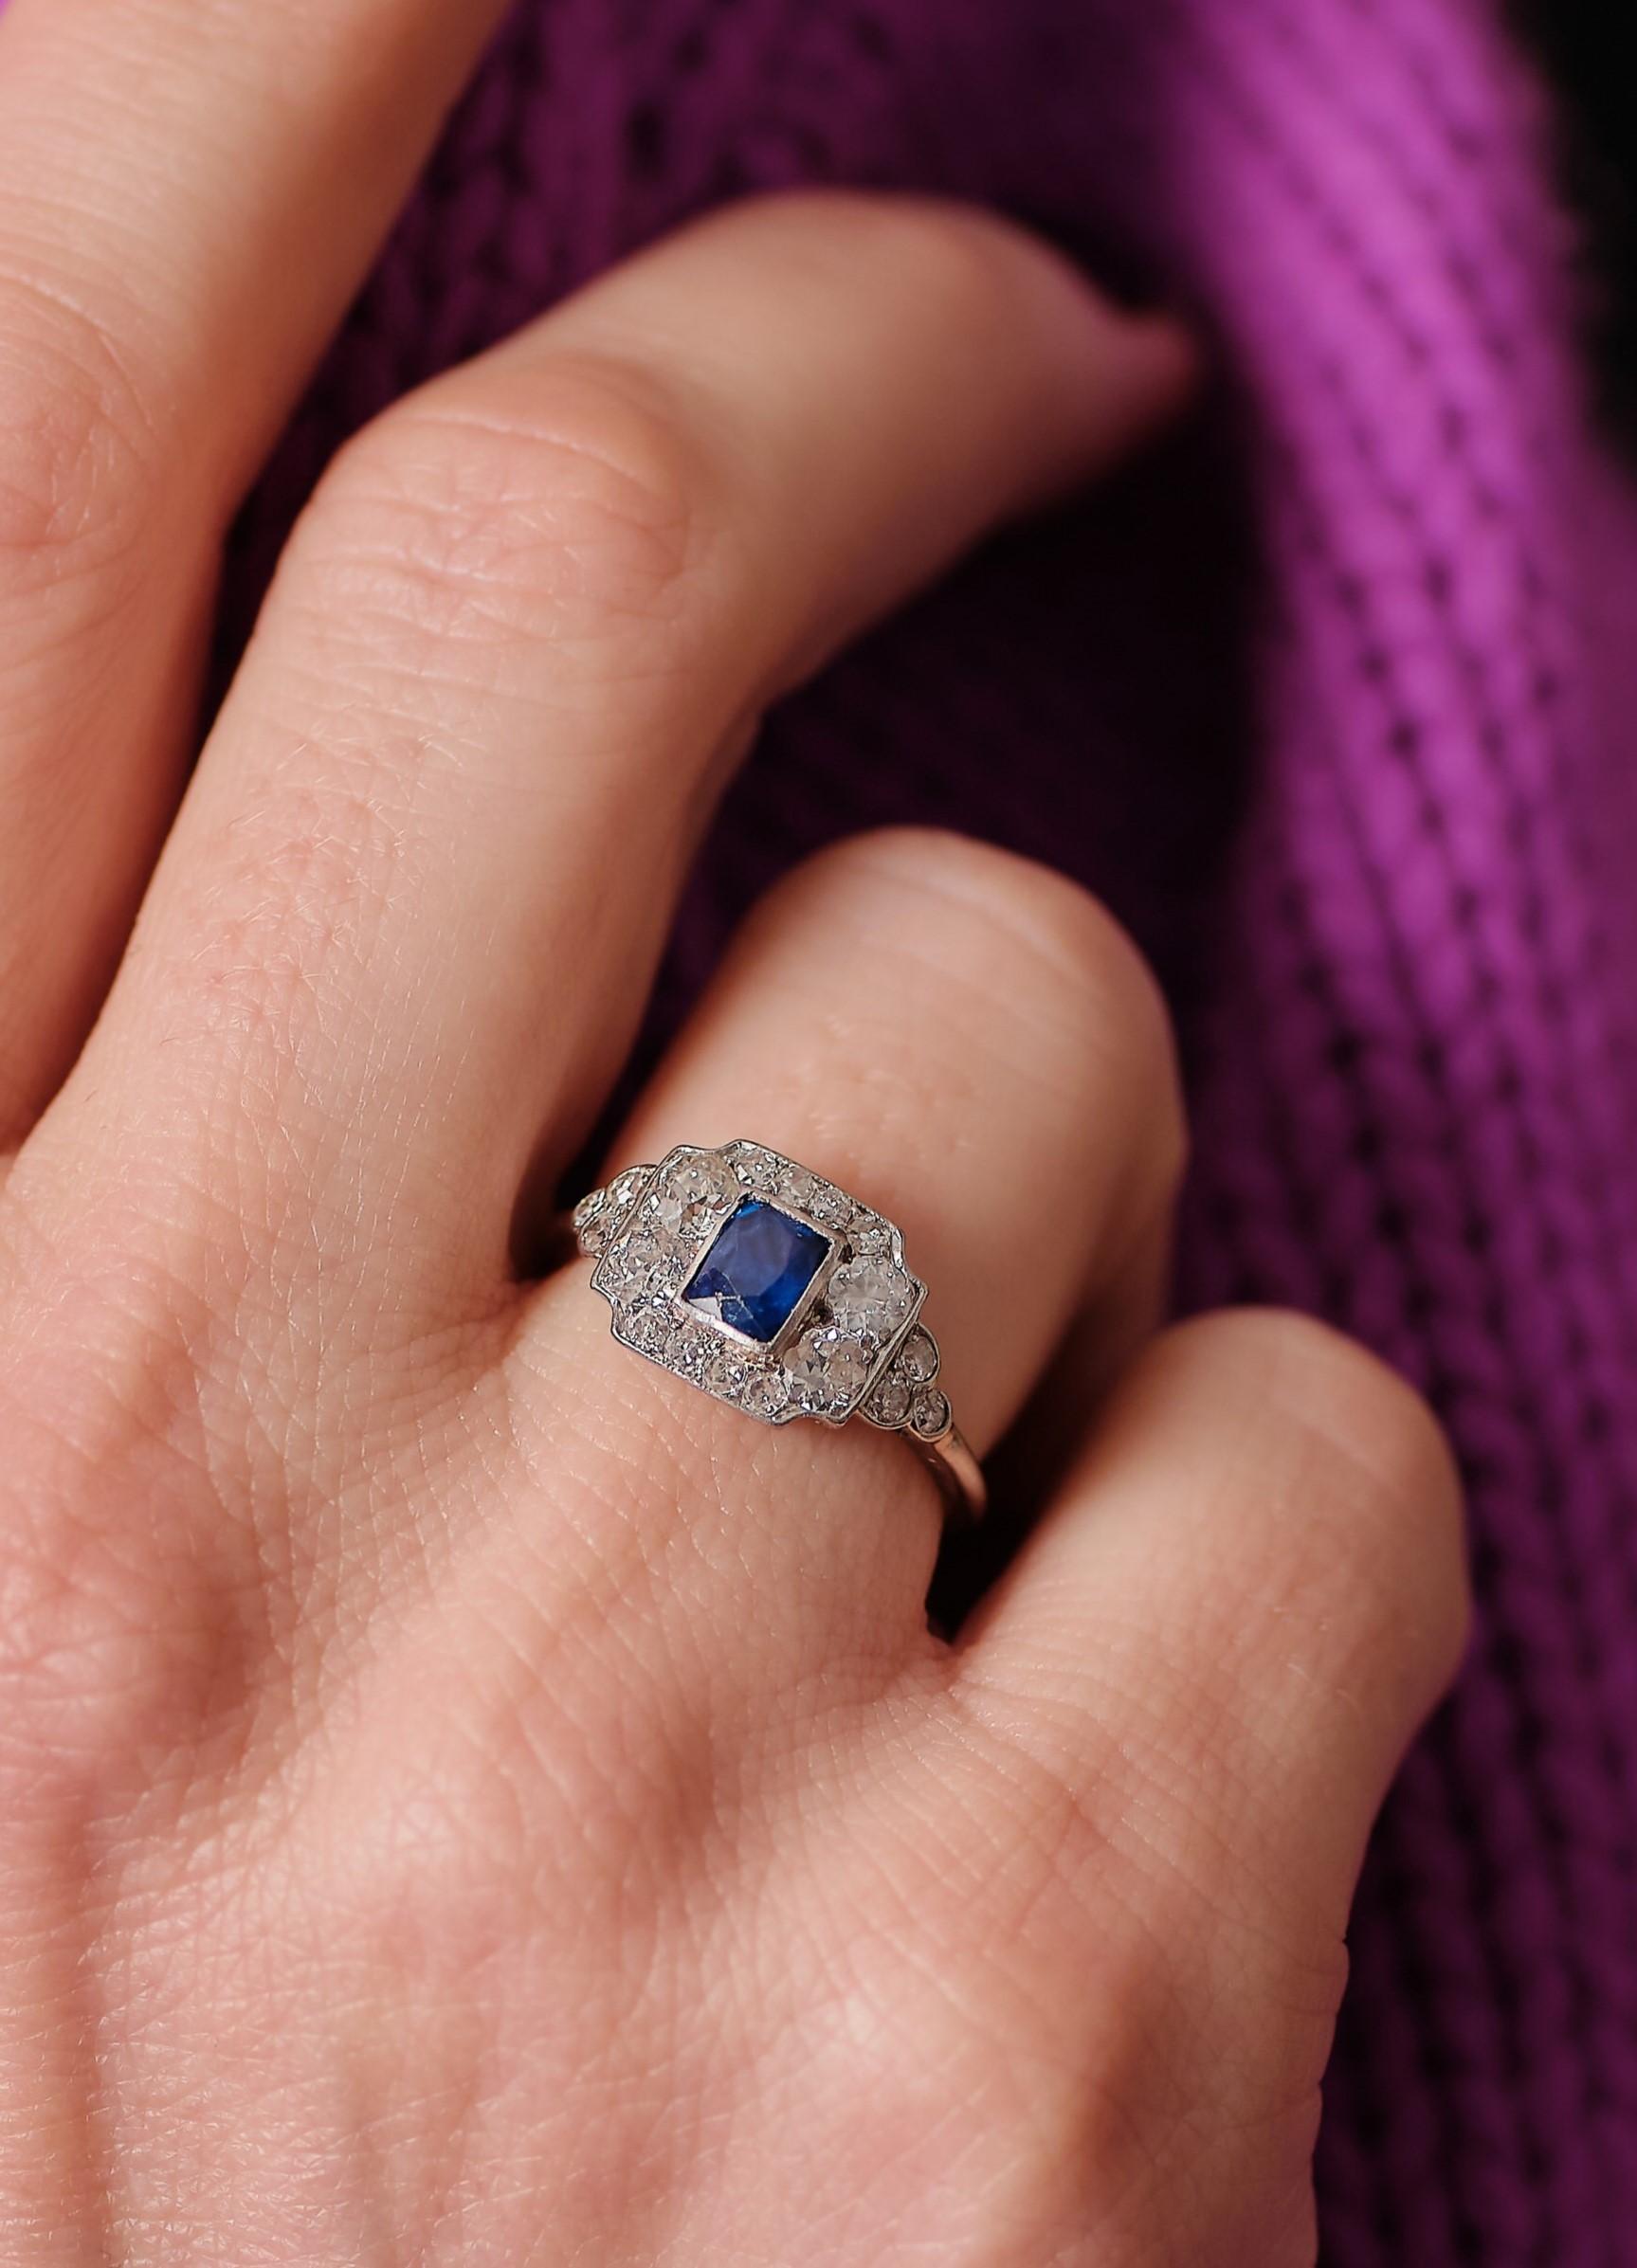 Art deco platinum diamond and sapphire ring

18 old and 8/8 cut diamond total approx. 0.80 ctv G-I / VS-P, ring size 16.5 mm US size 6, weight 3 grams.
